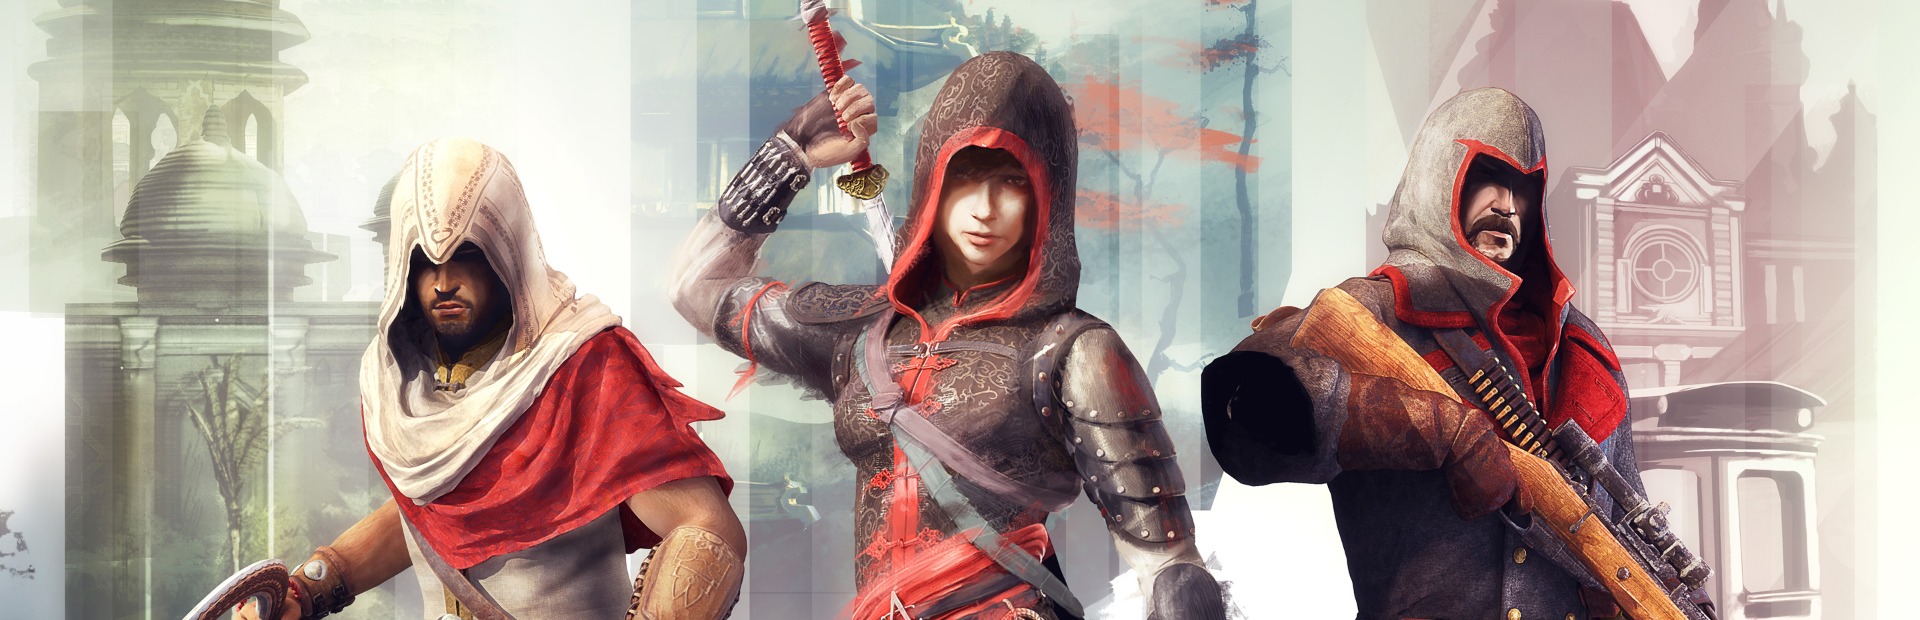 Assassins creed chronicles steam фото 39